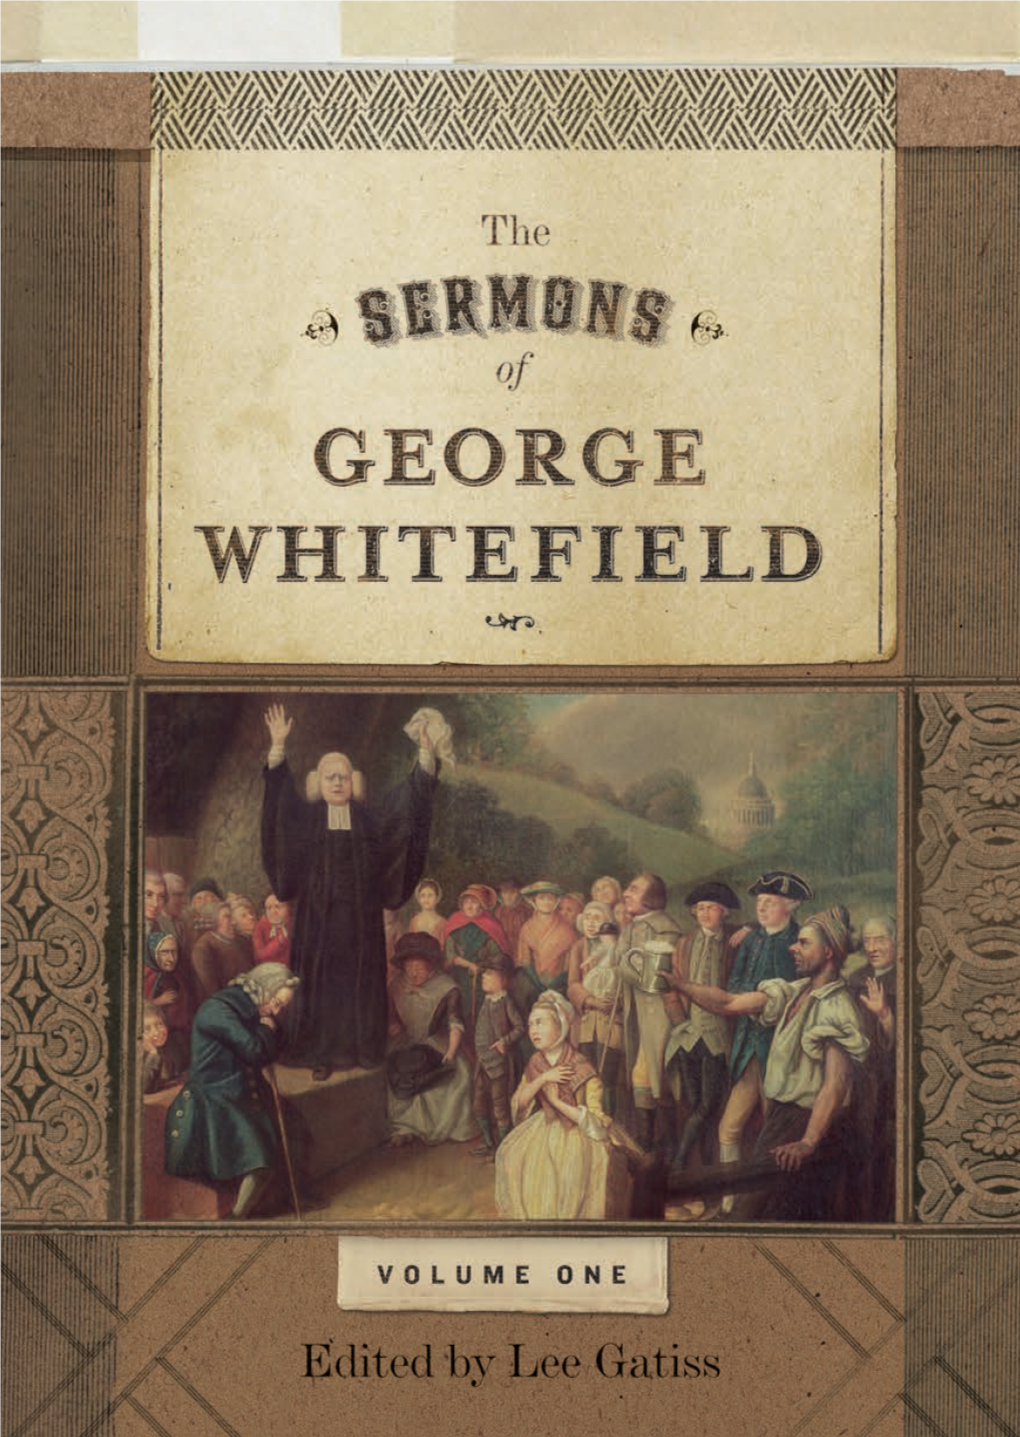 The Sermons of George Whitefield Volume 1